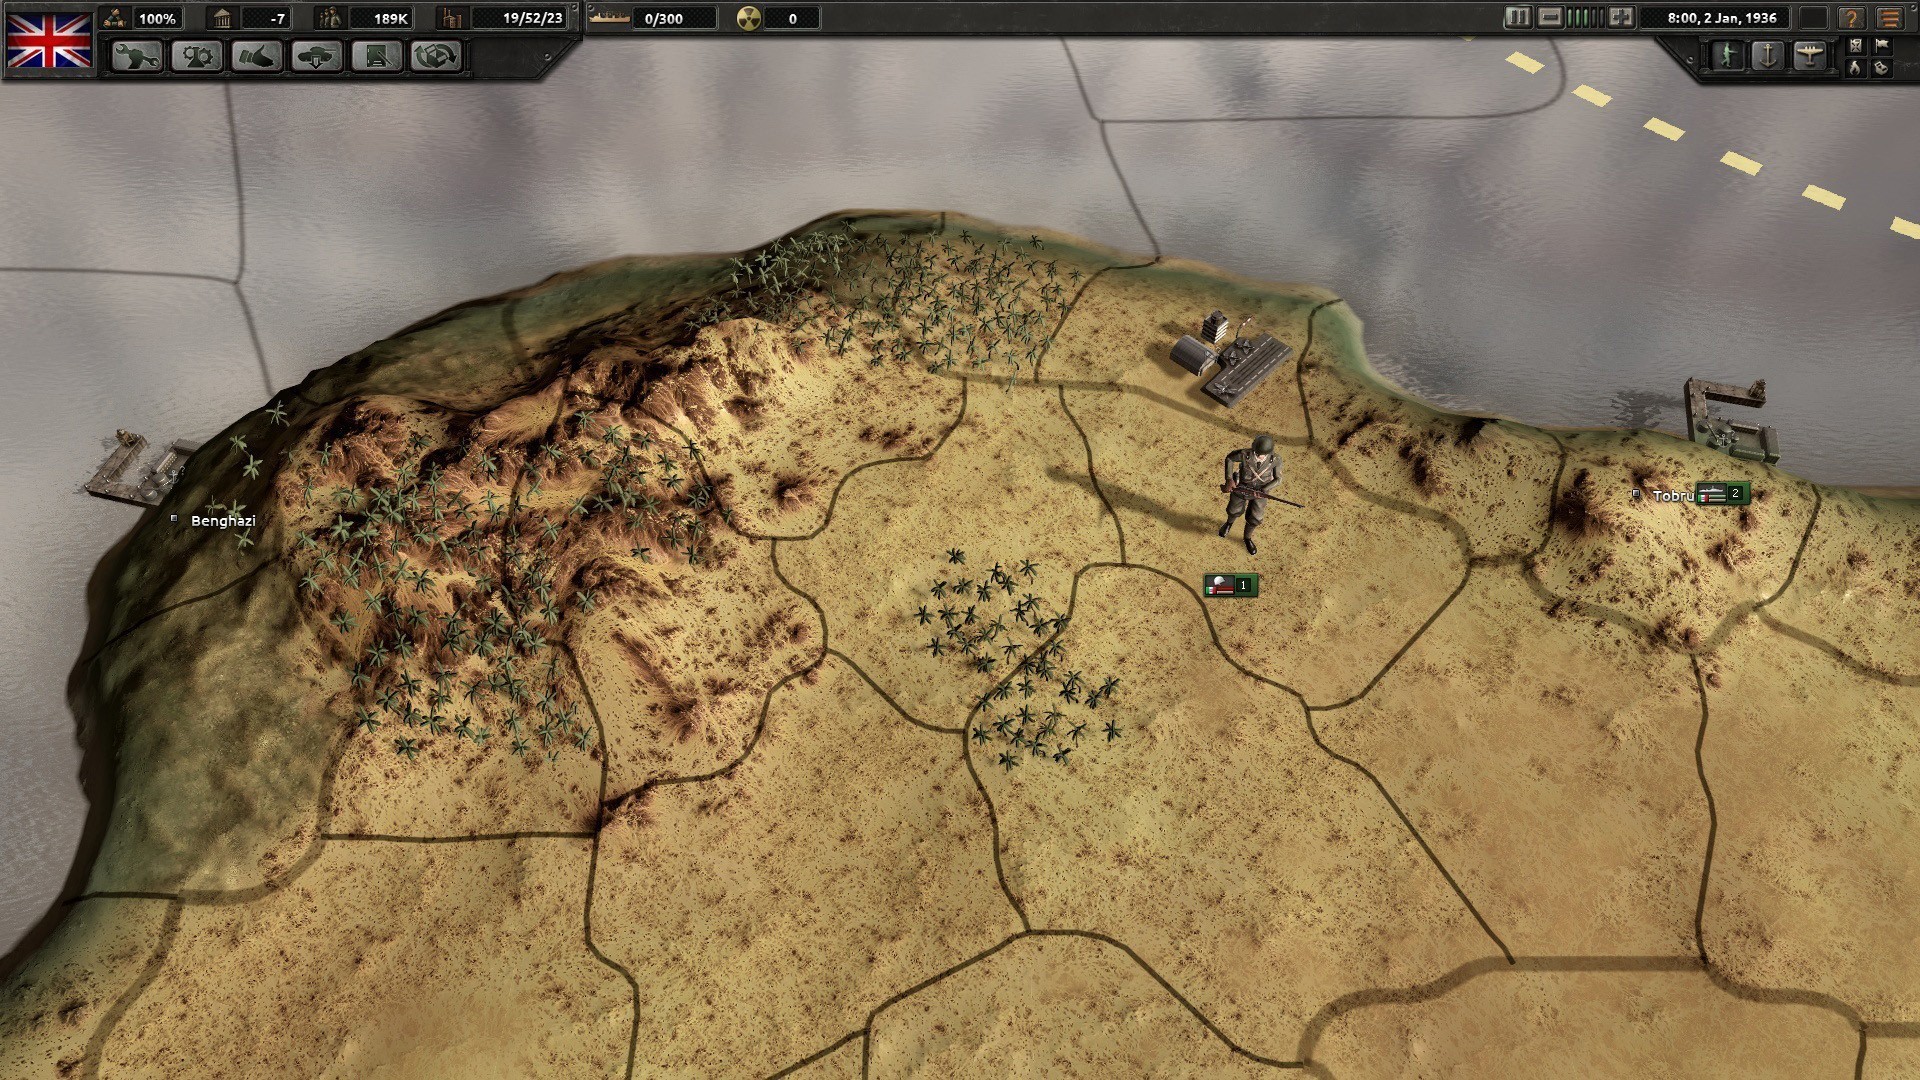 1920x1080 ... Hearts of Iron IV in North Africa ...